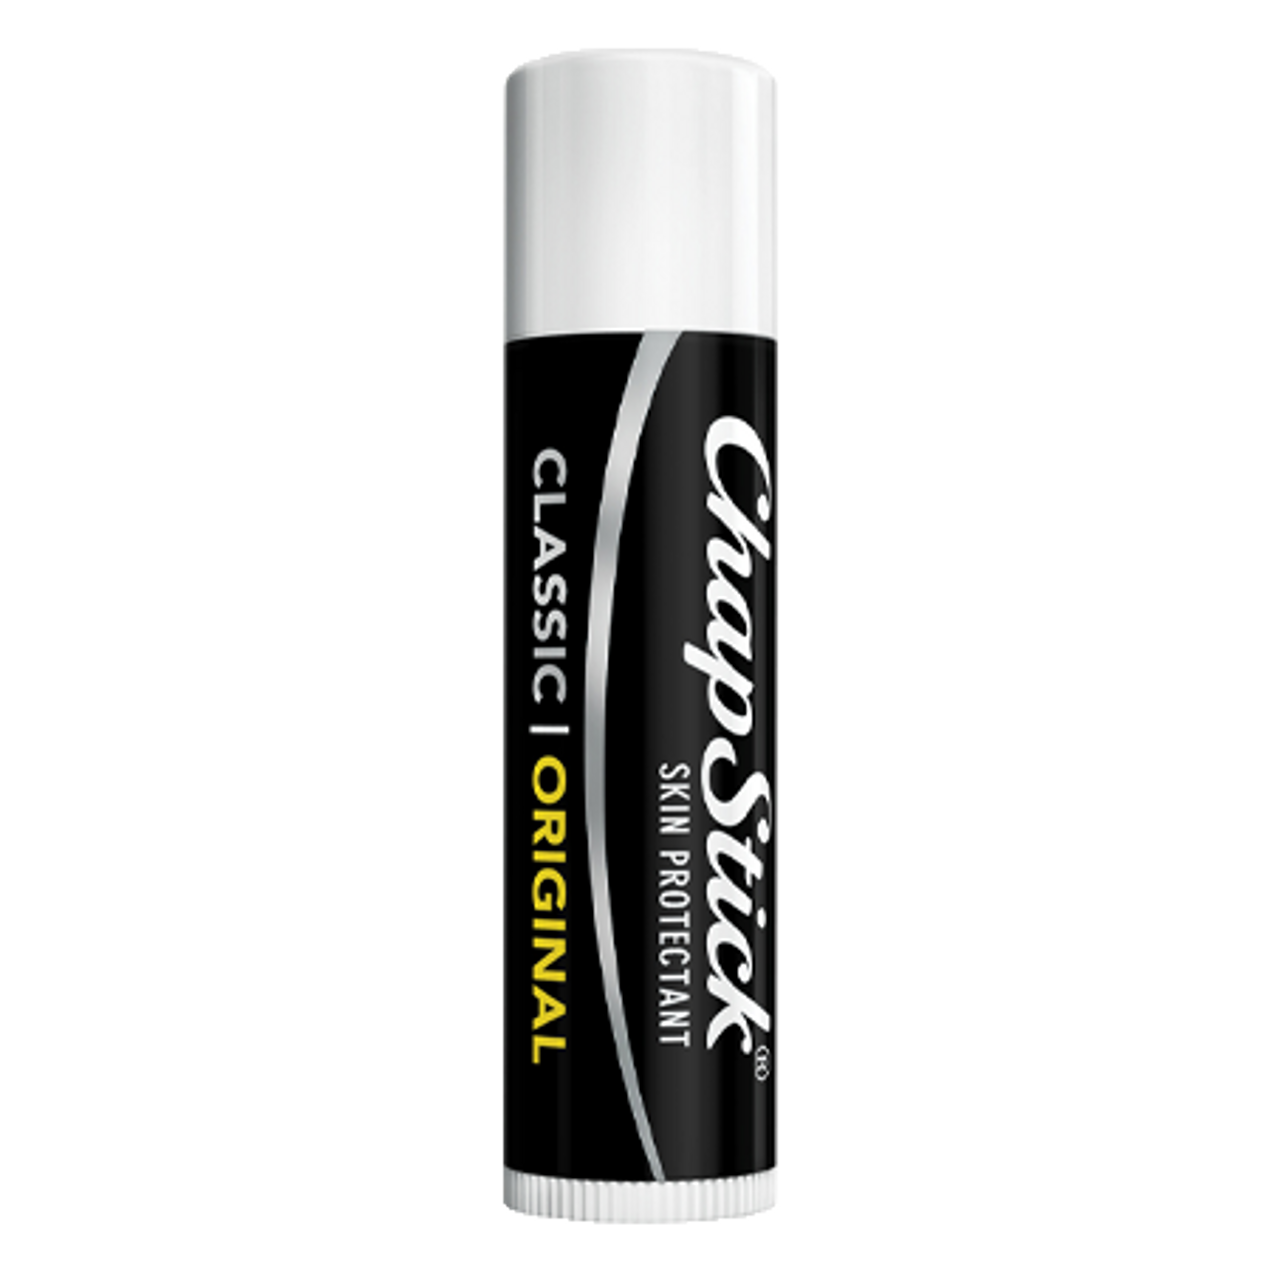 ChapStick® Classic Original Skin Protectant to protect and moisturize. Regular flavor, box of 12.